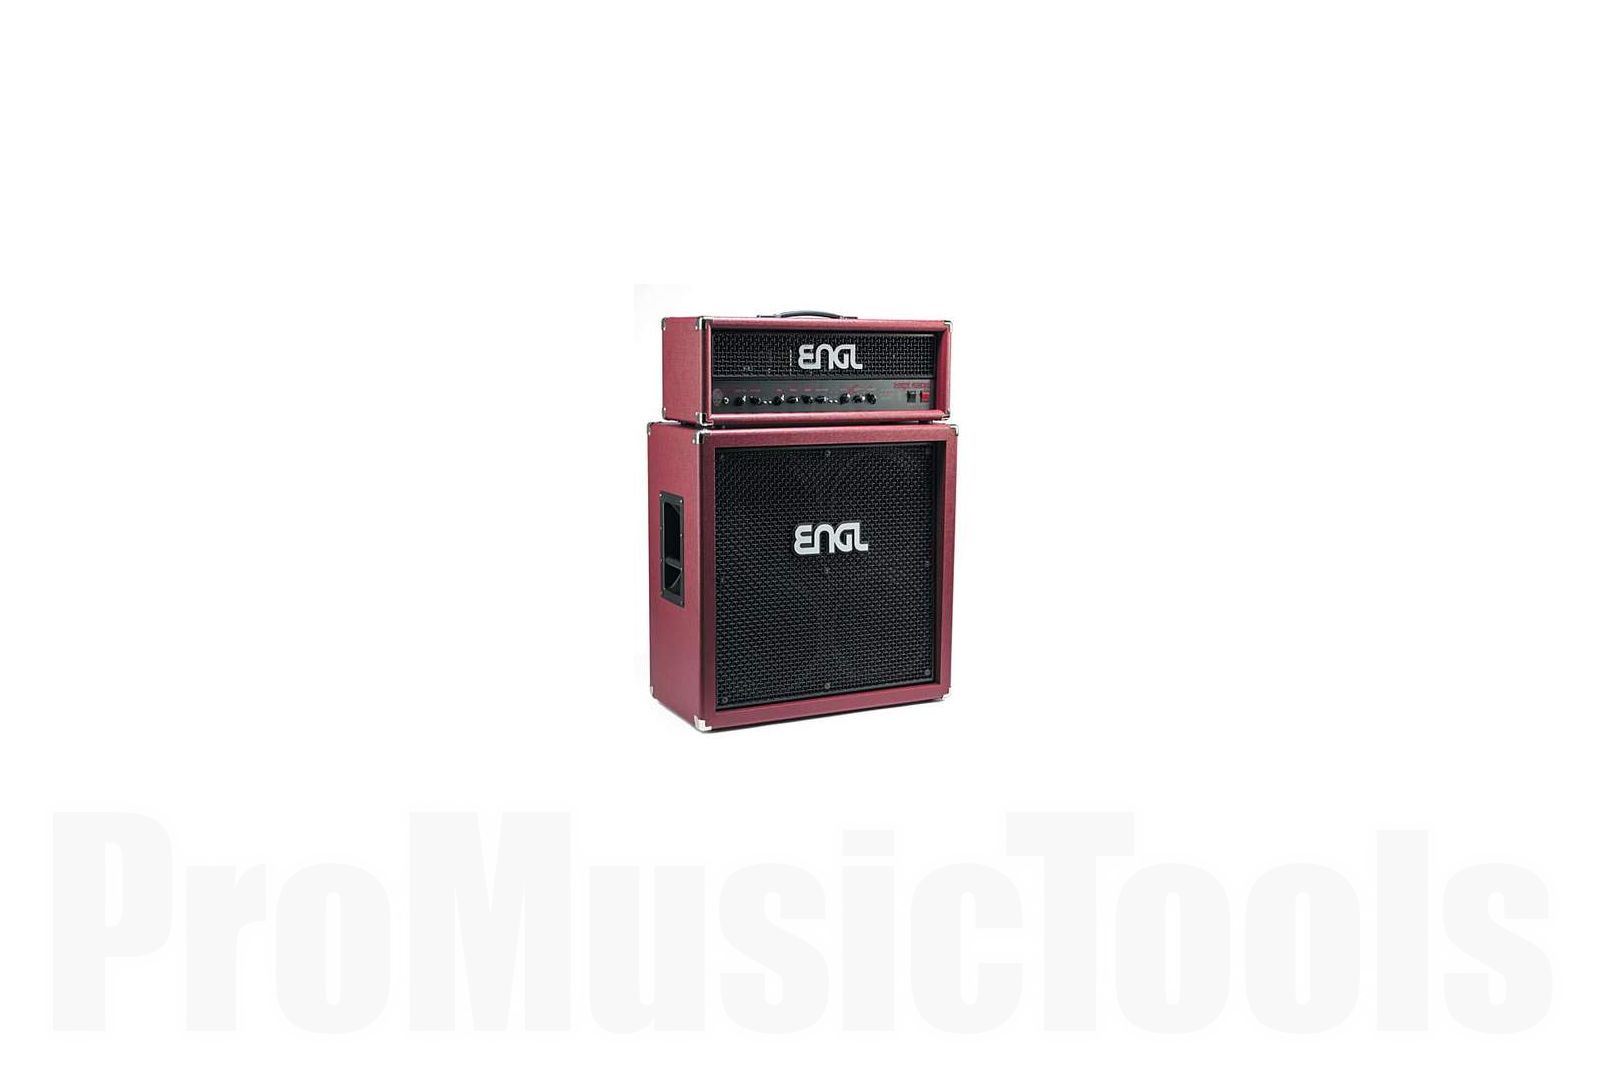 The Extreme Aggression amp head is sold separately and not included in this offer.